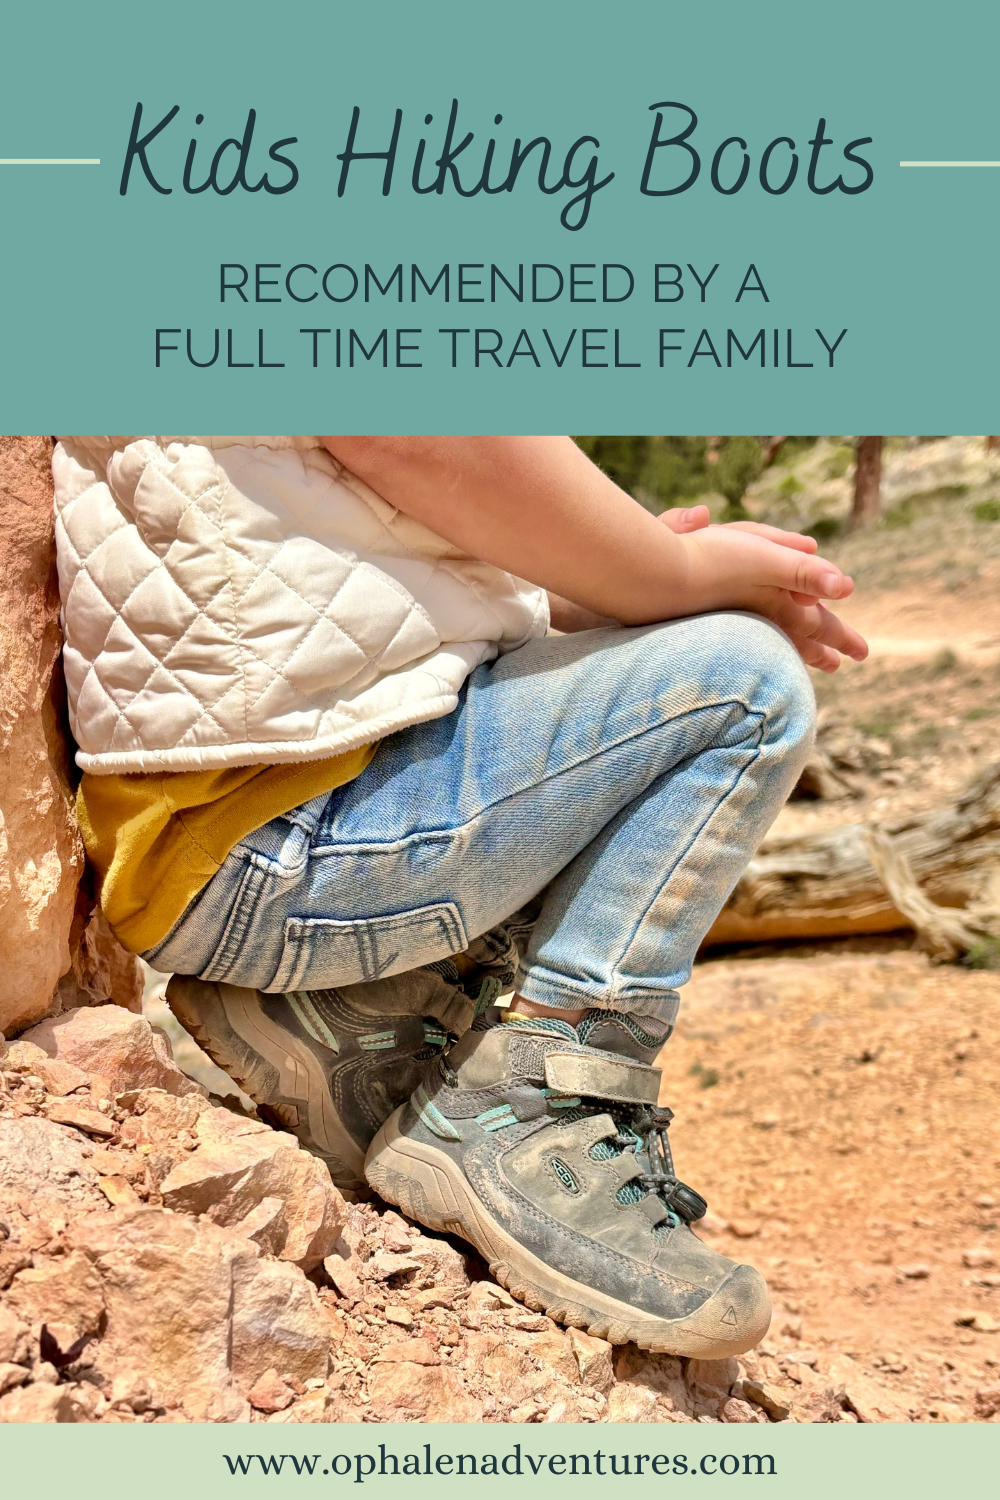 Kids Hiking Boots: The Best Hiking Boots to Uplevel Hiking!